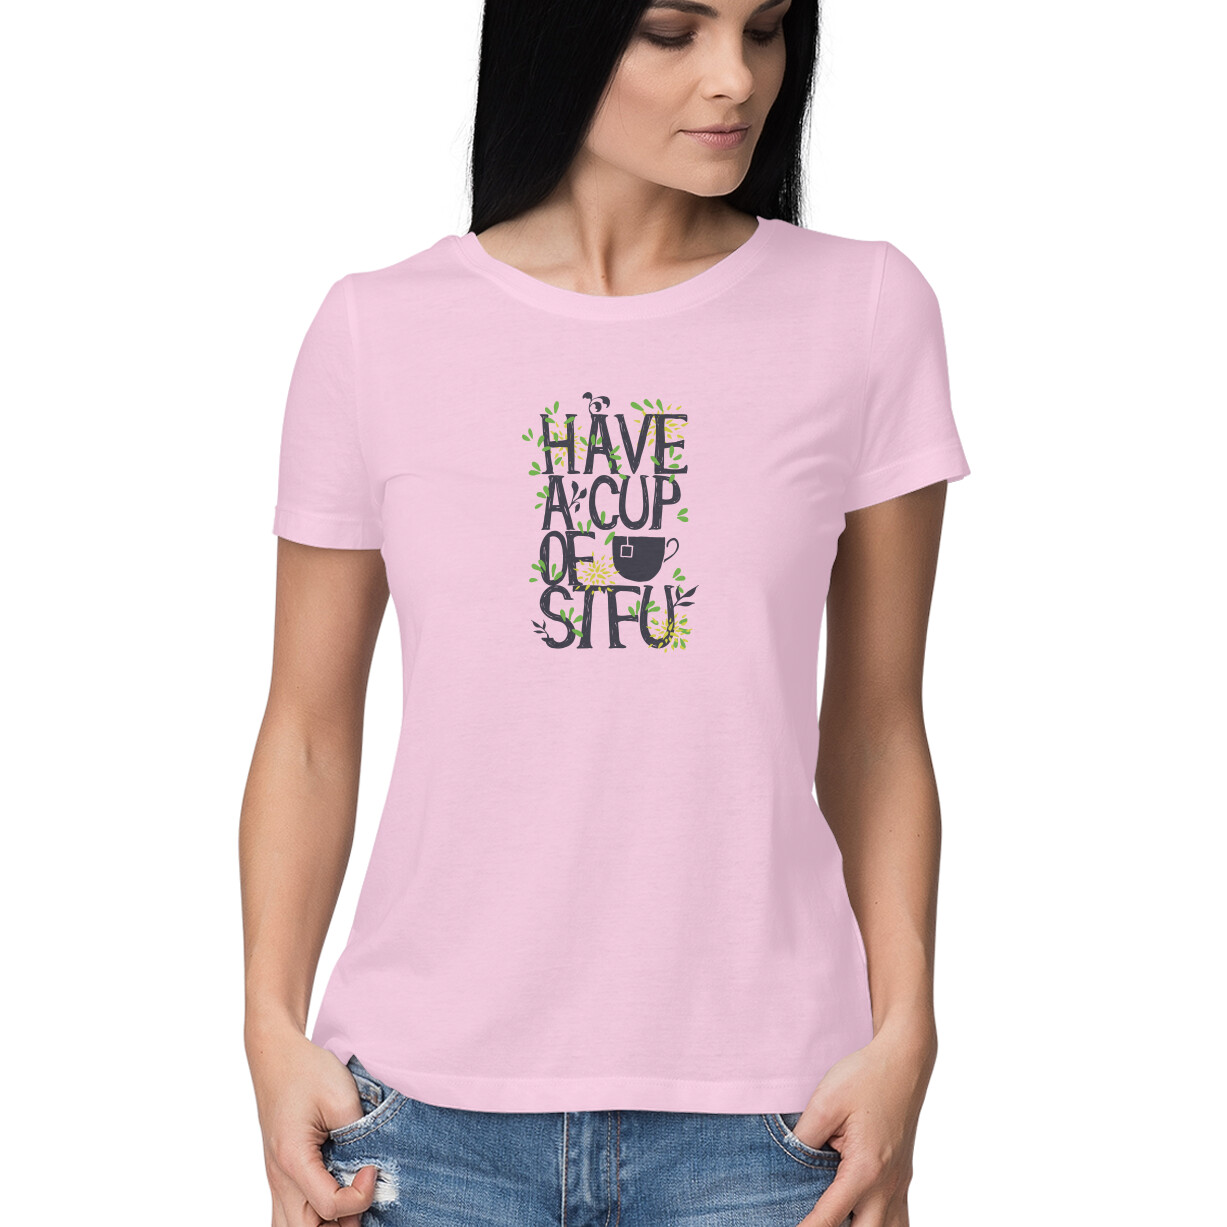 have a cup of sifu, Funny T-shirt quotes and sayings